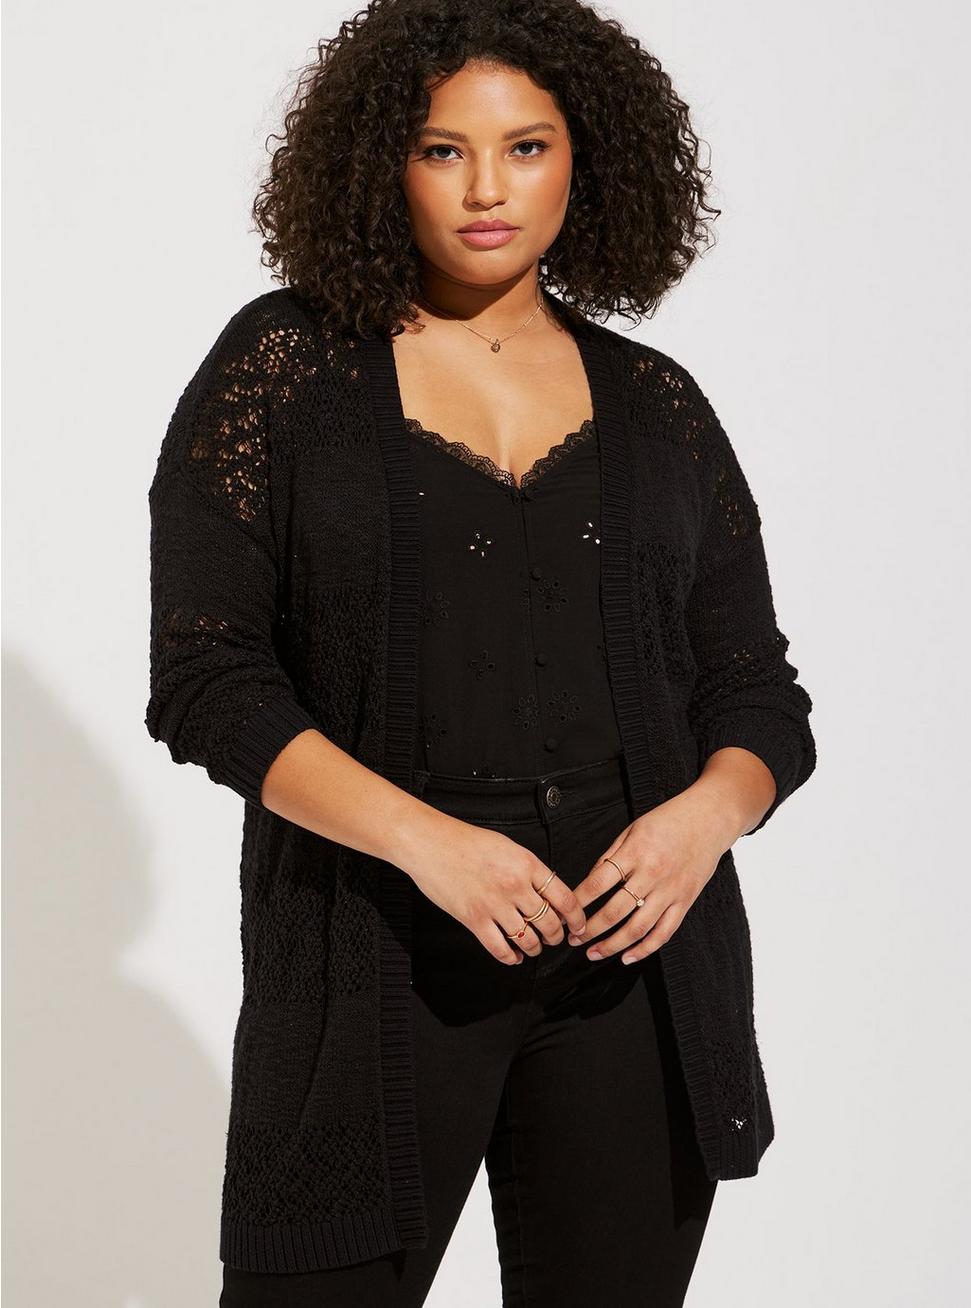 Open Stitch Cardigan Open Front Sweater, DEEP BLACK, hi-res